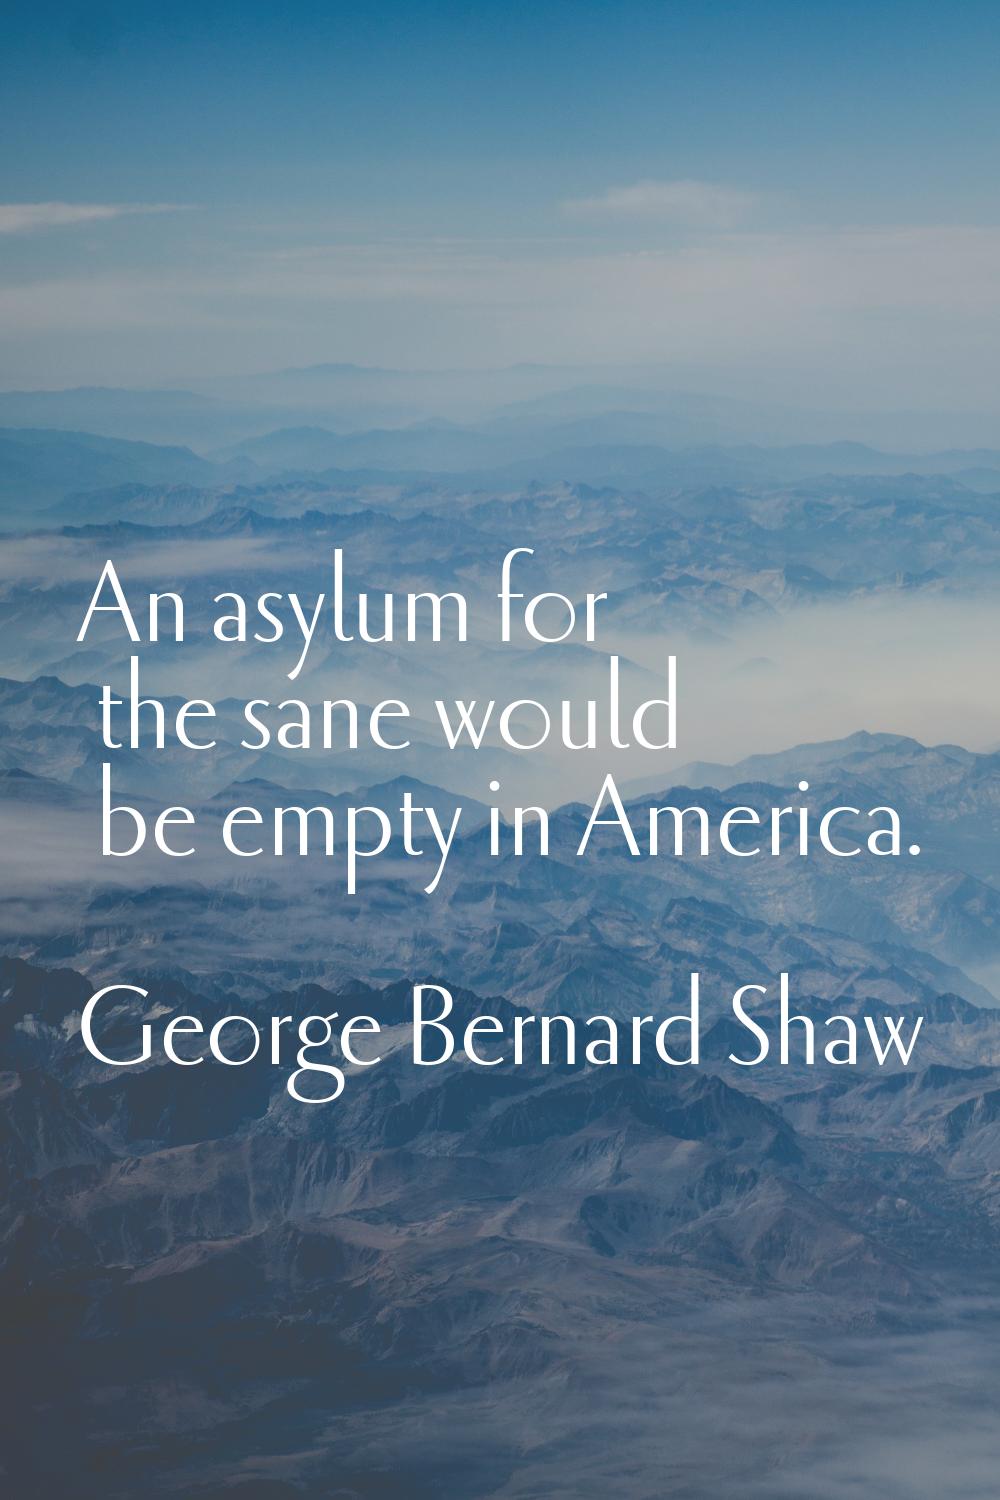 An asylum for the sane would be empty in America.